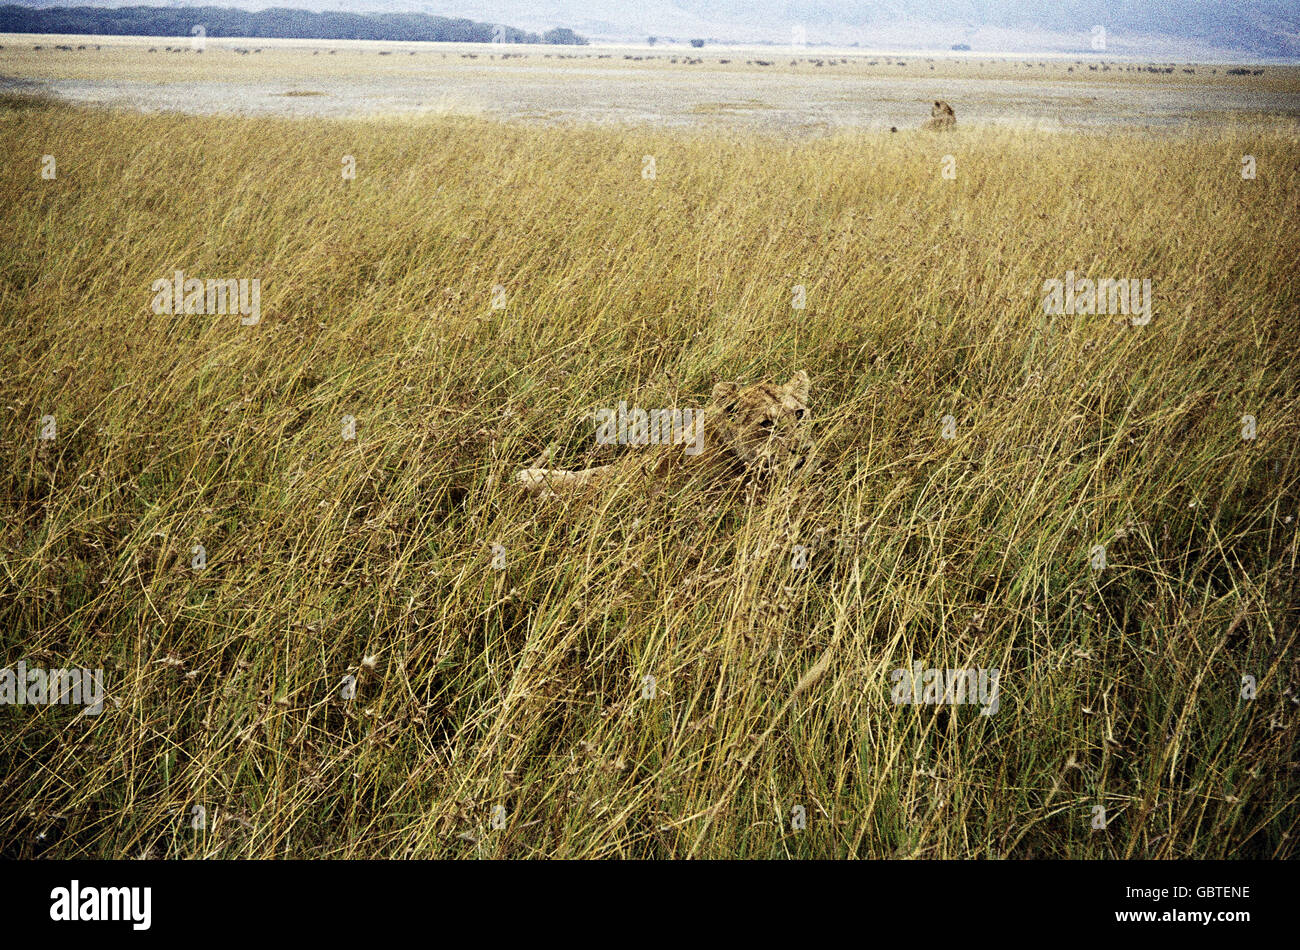 geography / travel, Tanzania, Serengeti, Ngorongoro, lions in grassland, 1960s, 60s, 20th century, historic, historical, Africa, zoology, animal, animals, mammal, mammalian, mammals, mammalians, mammalia, predator, beast of prey, carnivore, predators, beasts of prey, carnivores, national park, UNESCO World Natural Heritage Site / Sites, lowlands, champaign, flat country, flat land, flat ground, flat, plain, level country, steppe, grass-covered plain, pampa, scrub, veld, Ilanos, steppes, savanna, grass-covered plains, landscape, landscapes, wideness, Additional-Rights-Clearences-Not Available Stock Photo